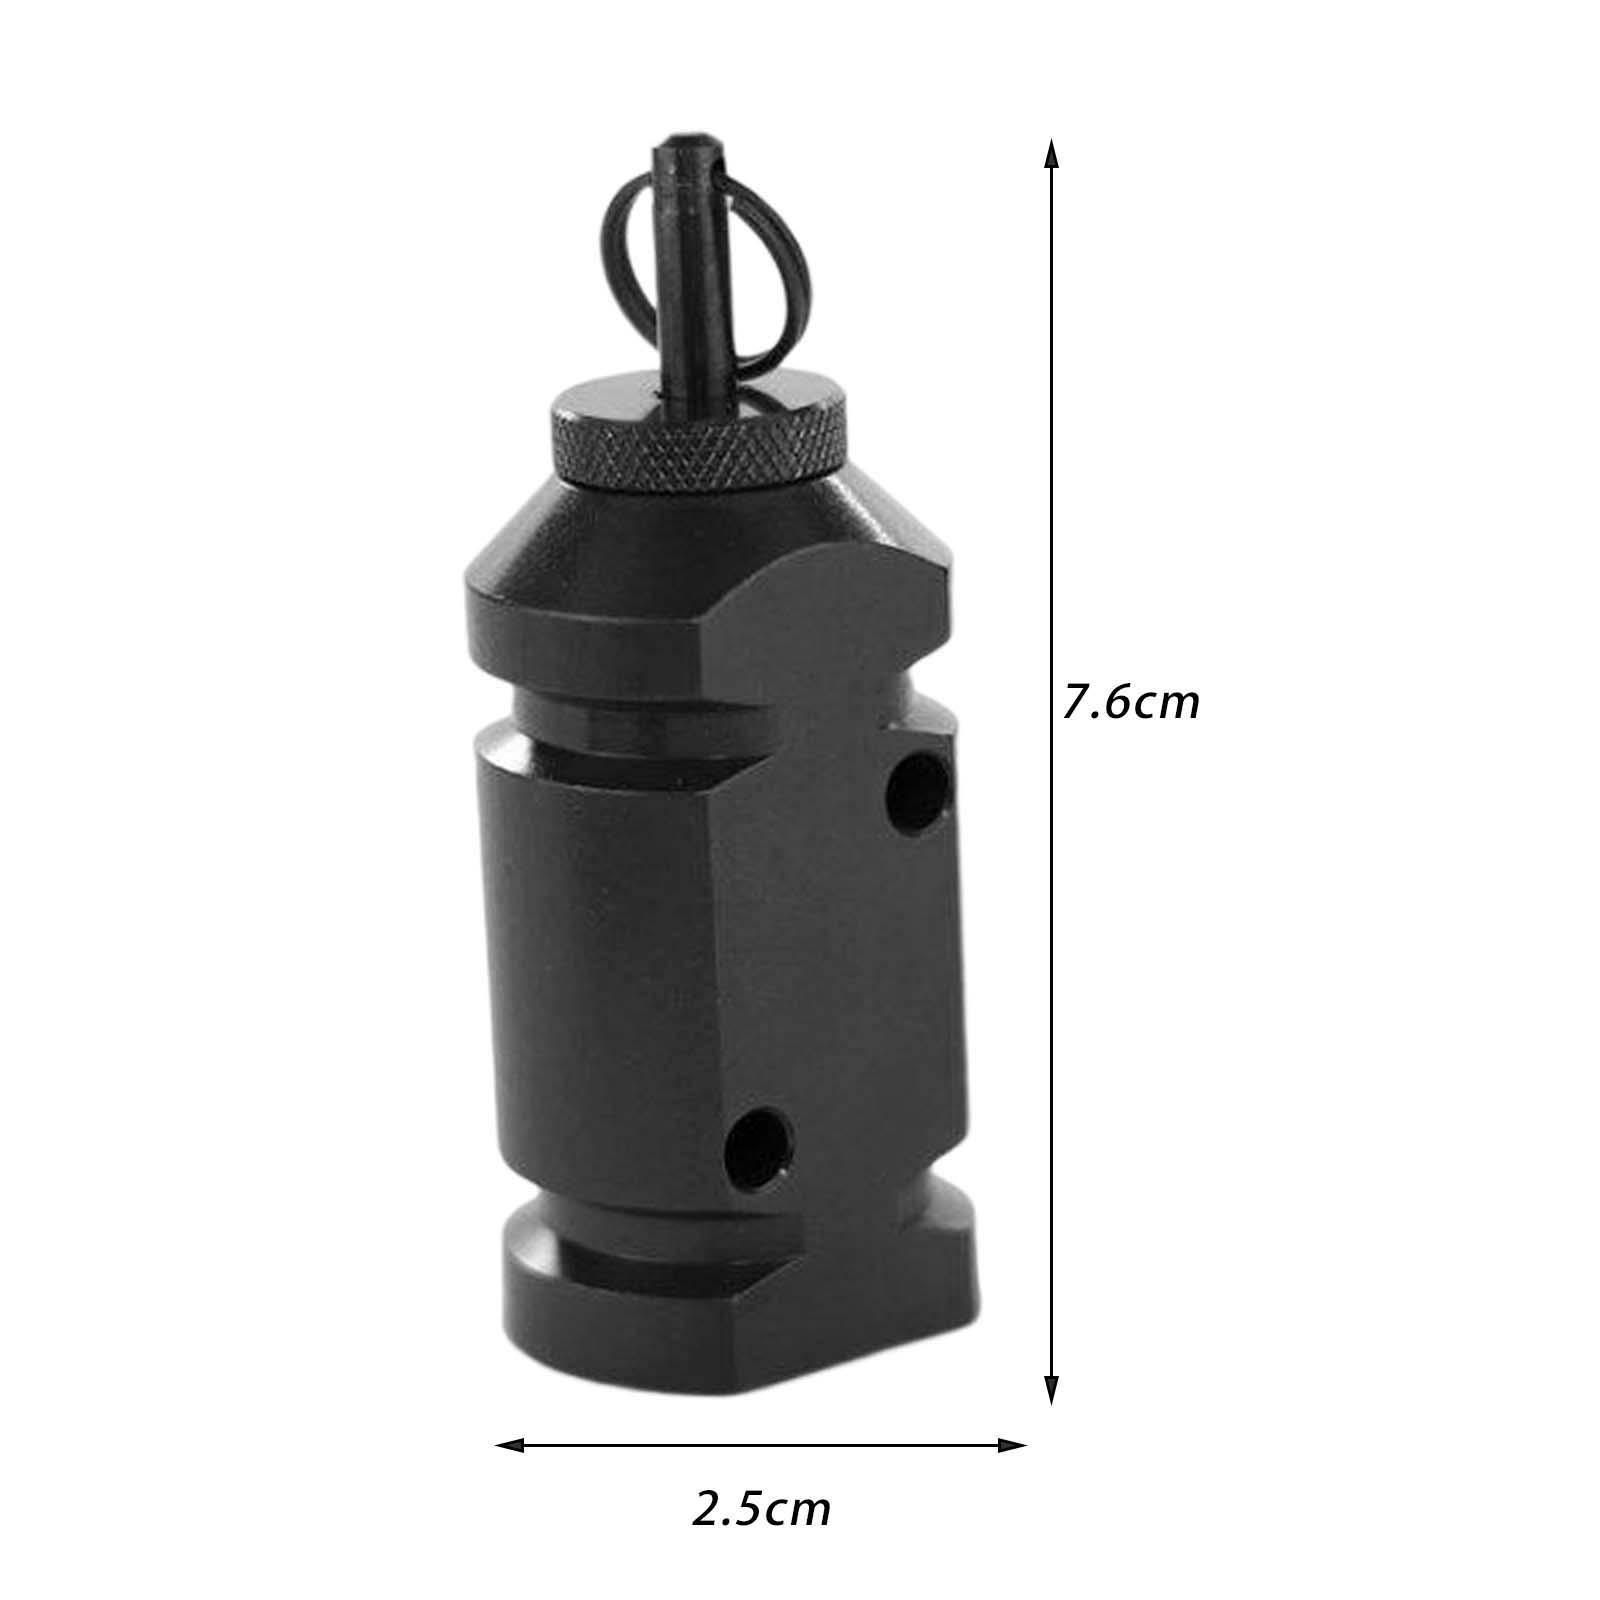 Trip Alarm Convenient Aluminum Alloy for Backpacking Emergency Backyard